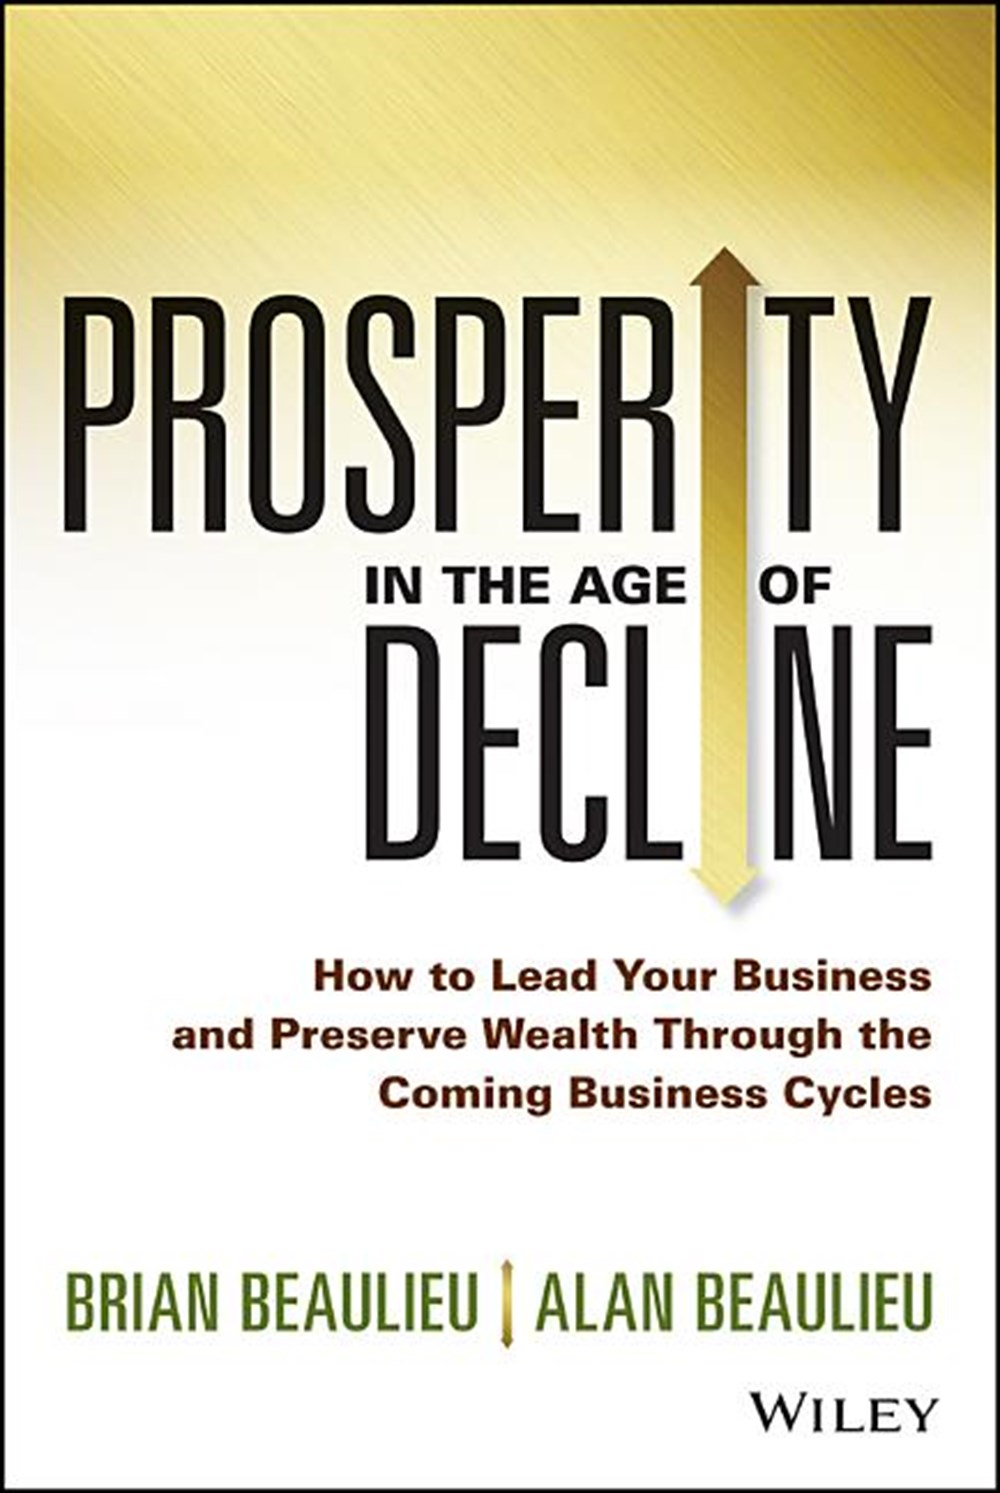 Prosperity in the Age of Decline: How to Lead Your Business and Preserve Wealth Through the Coming B